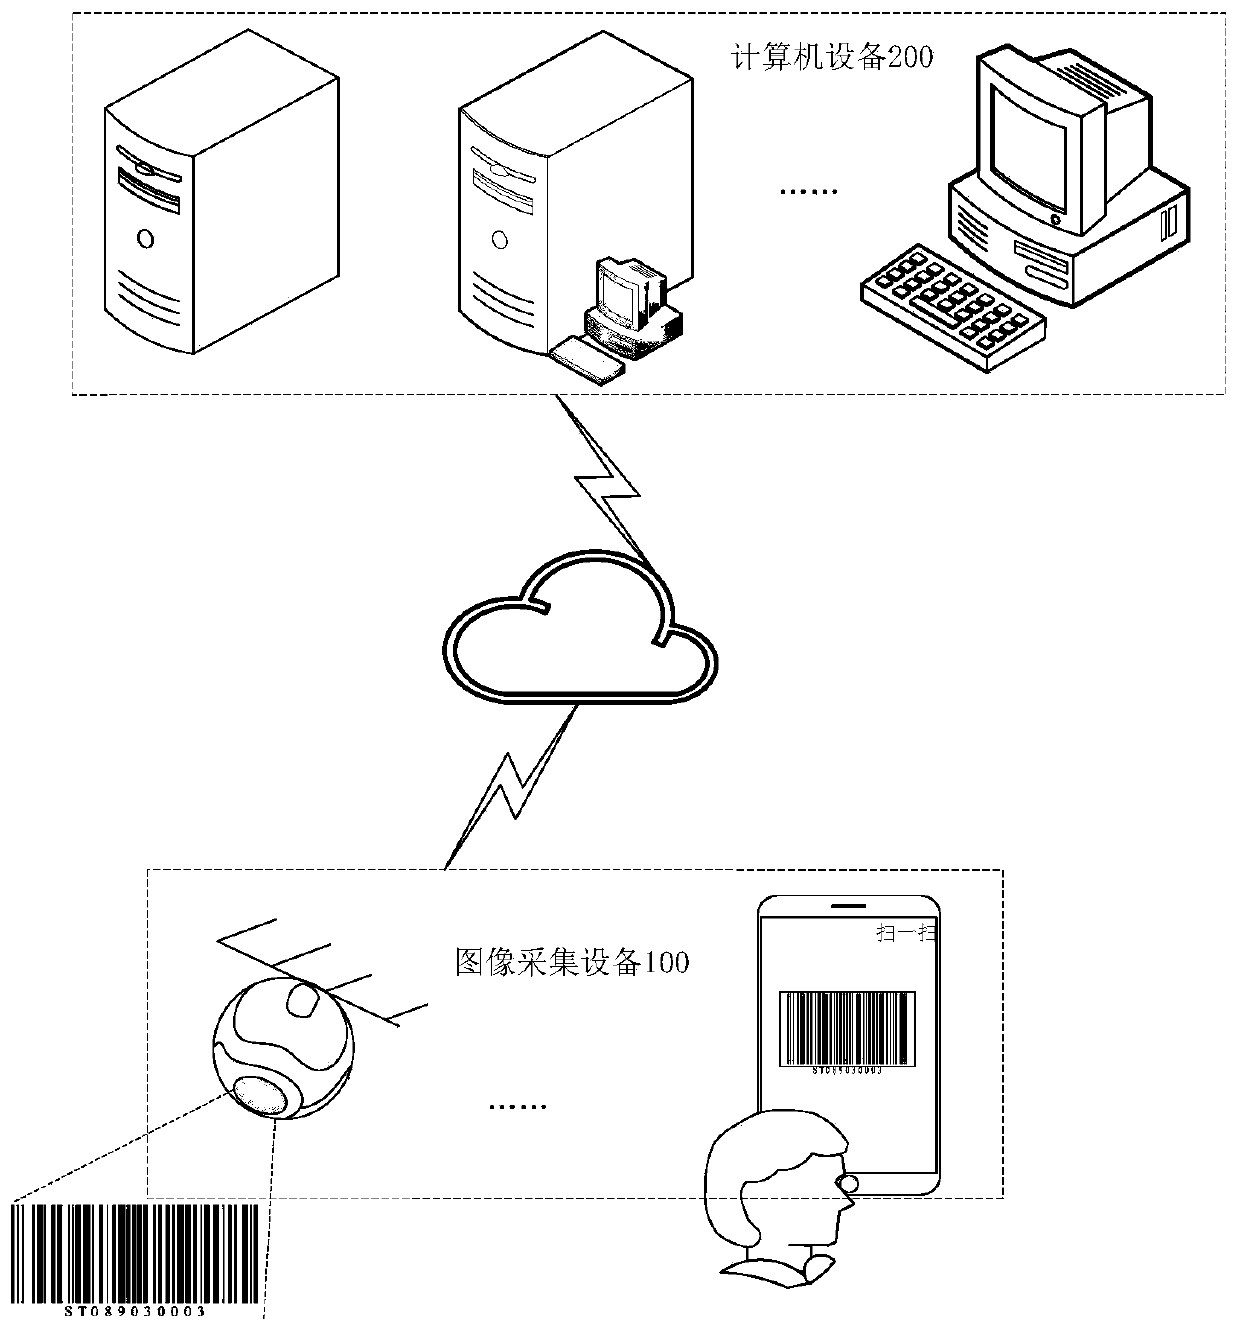 Bar code identification method and device